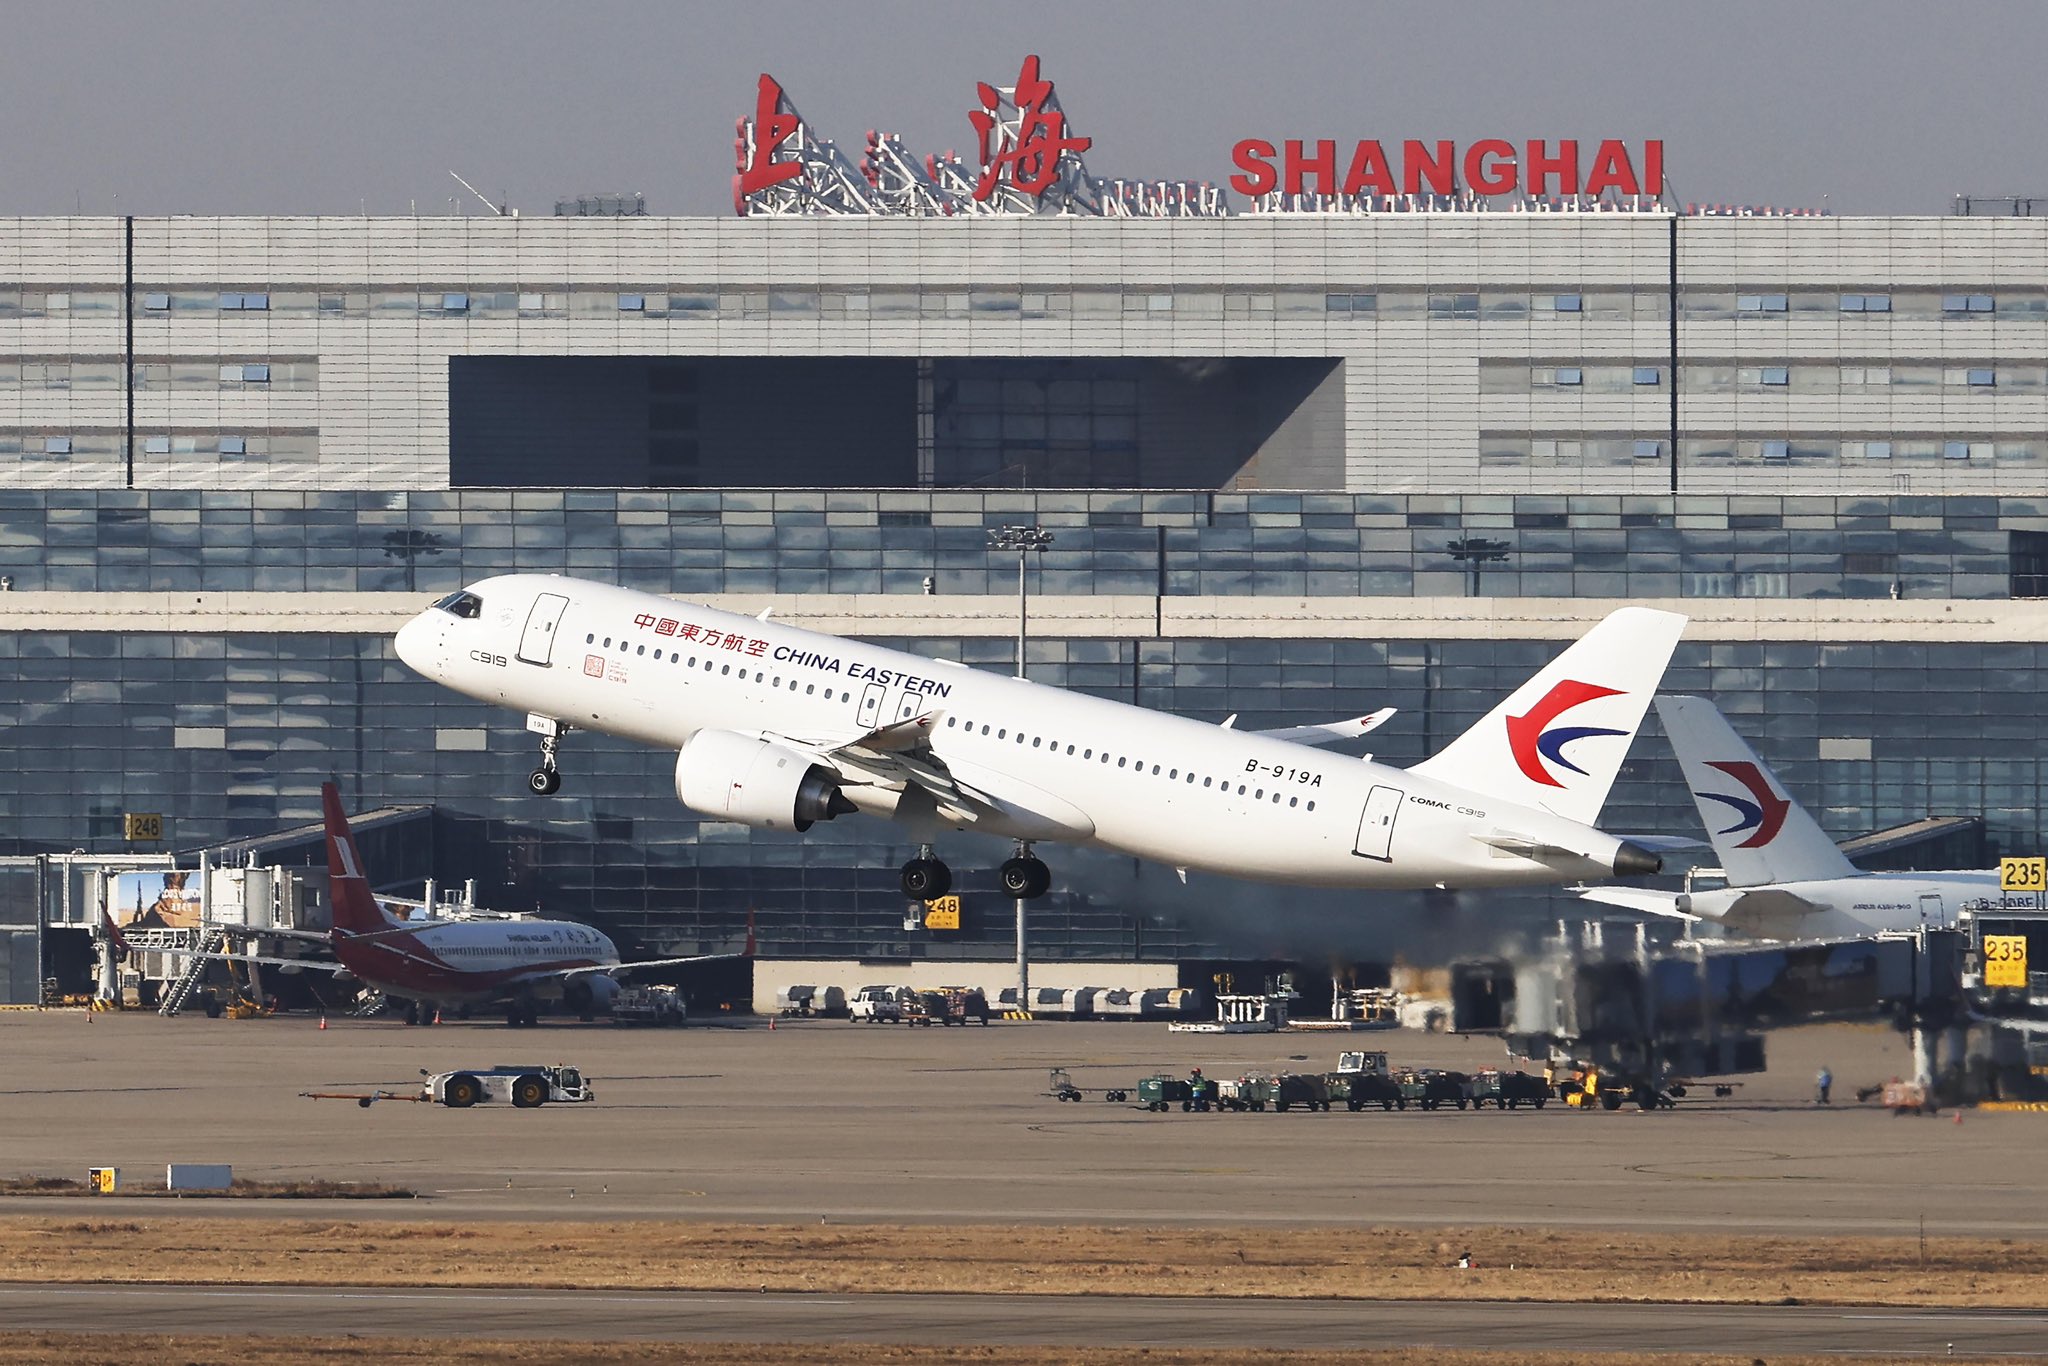 International convention on civil aviation crimes takes effect in China Today.